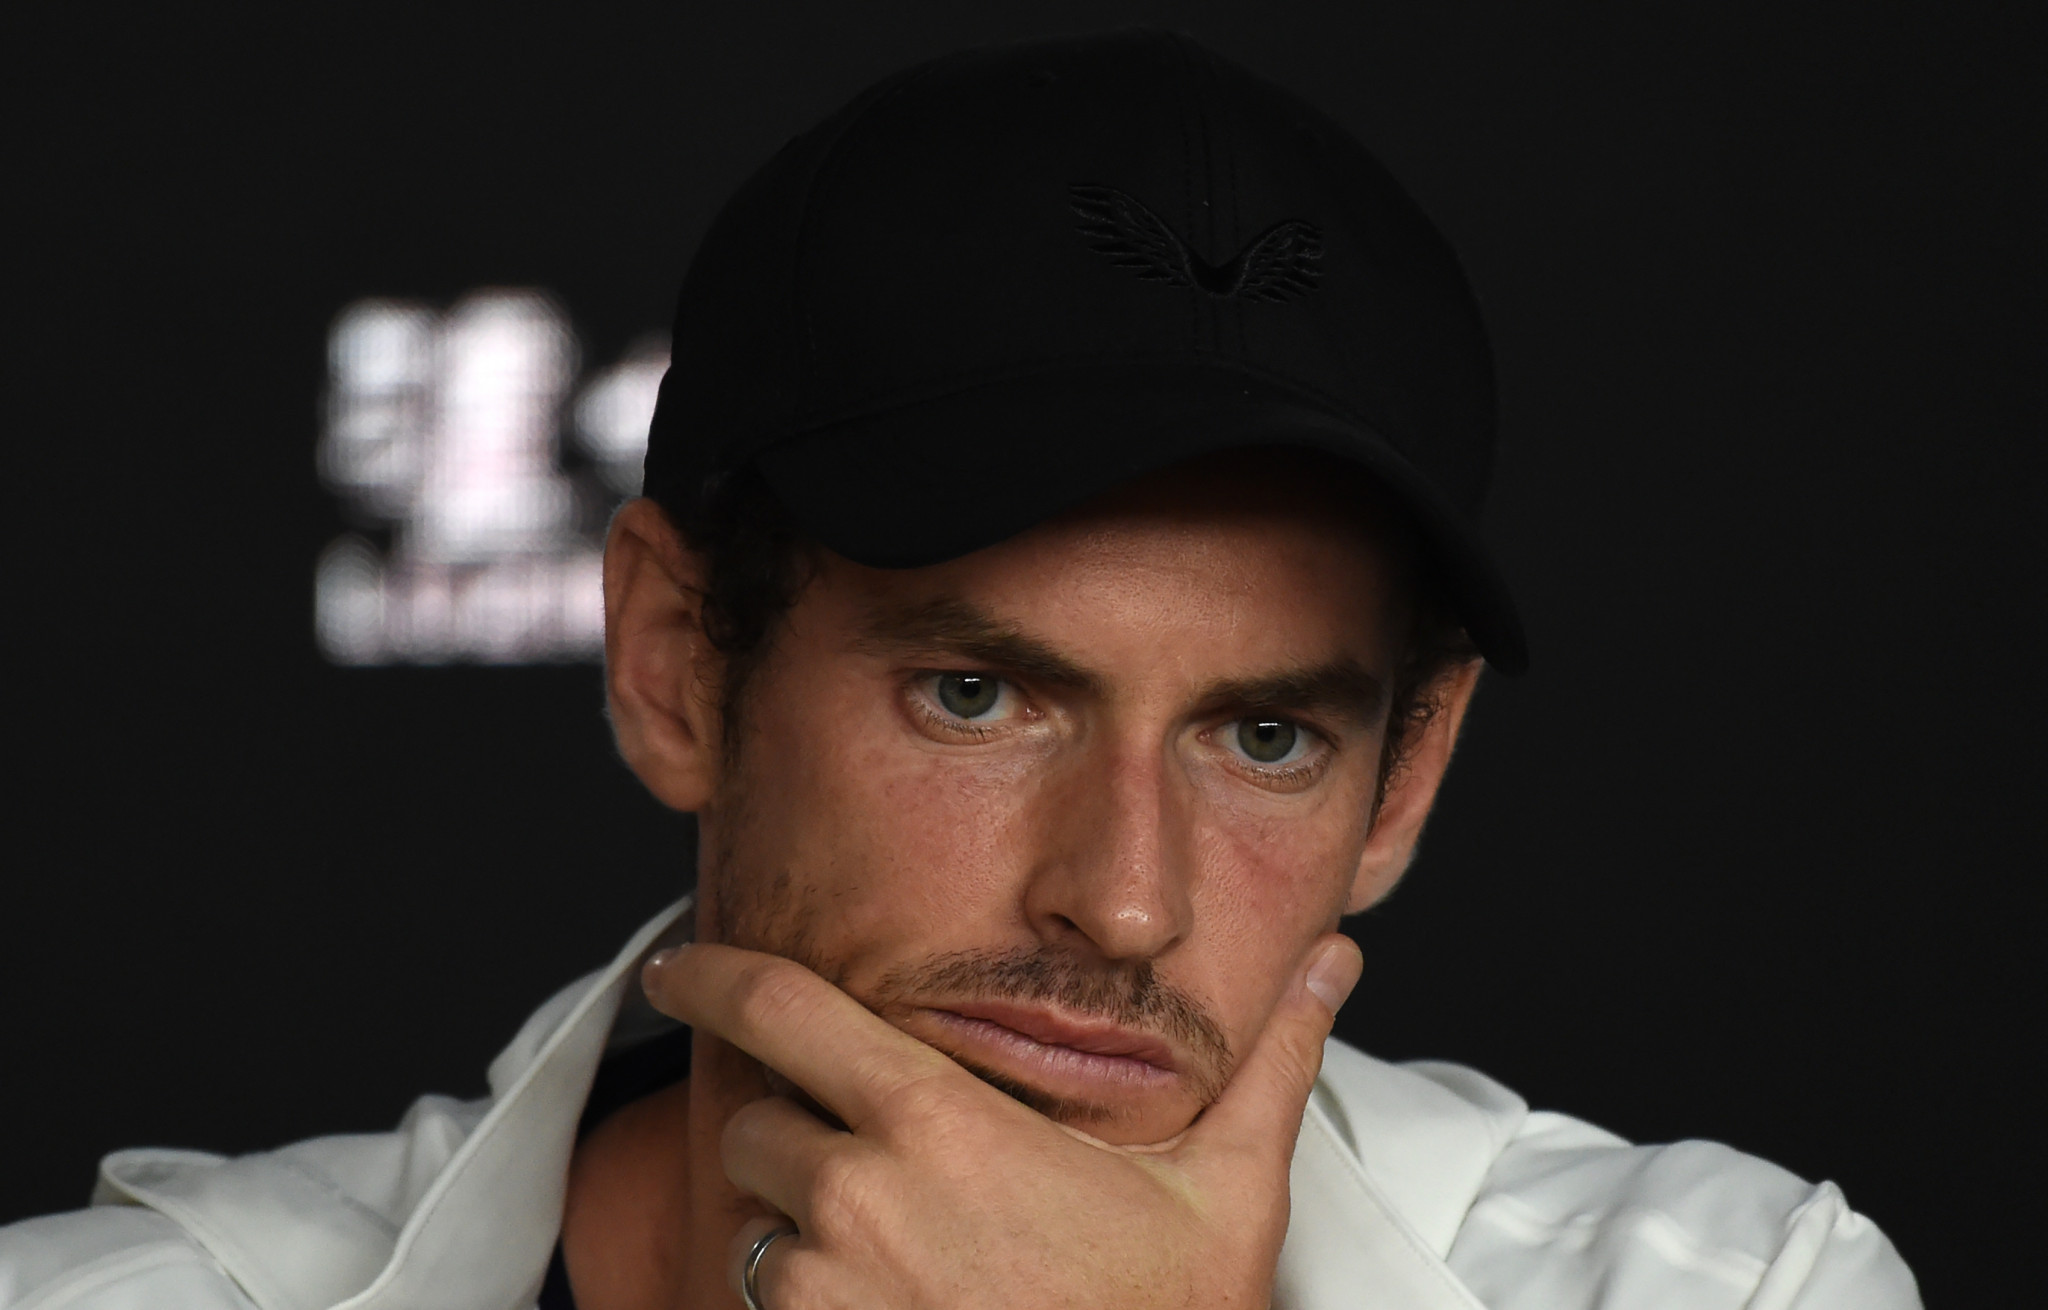 Britain's three-time Grand Slam champion Sir Andy Murray had previously suggested hip problems could have forced him to retire after the Australian Open in January ©Getty Images